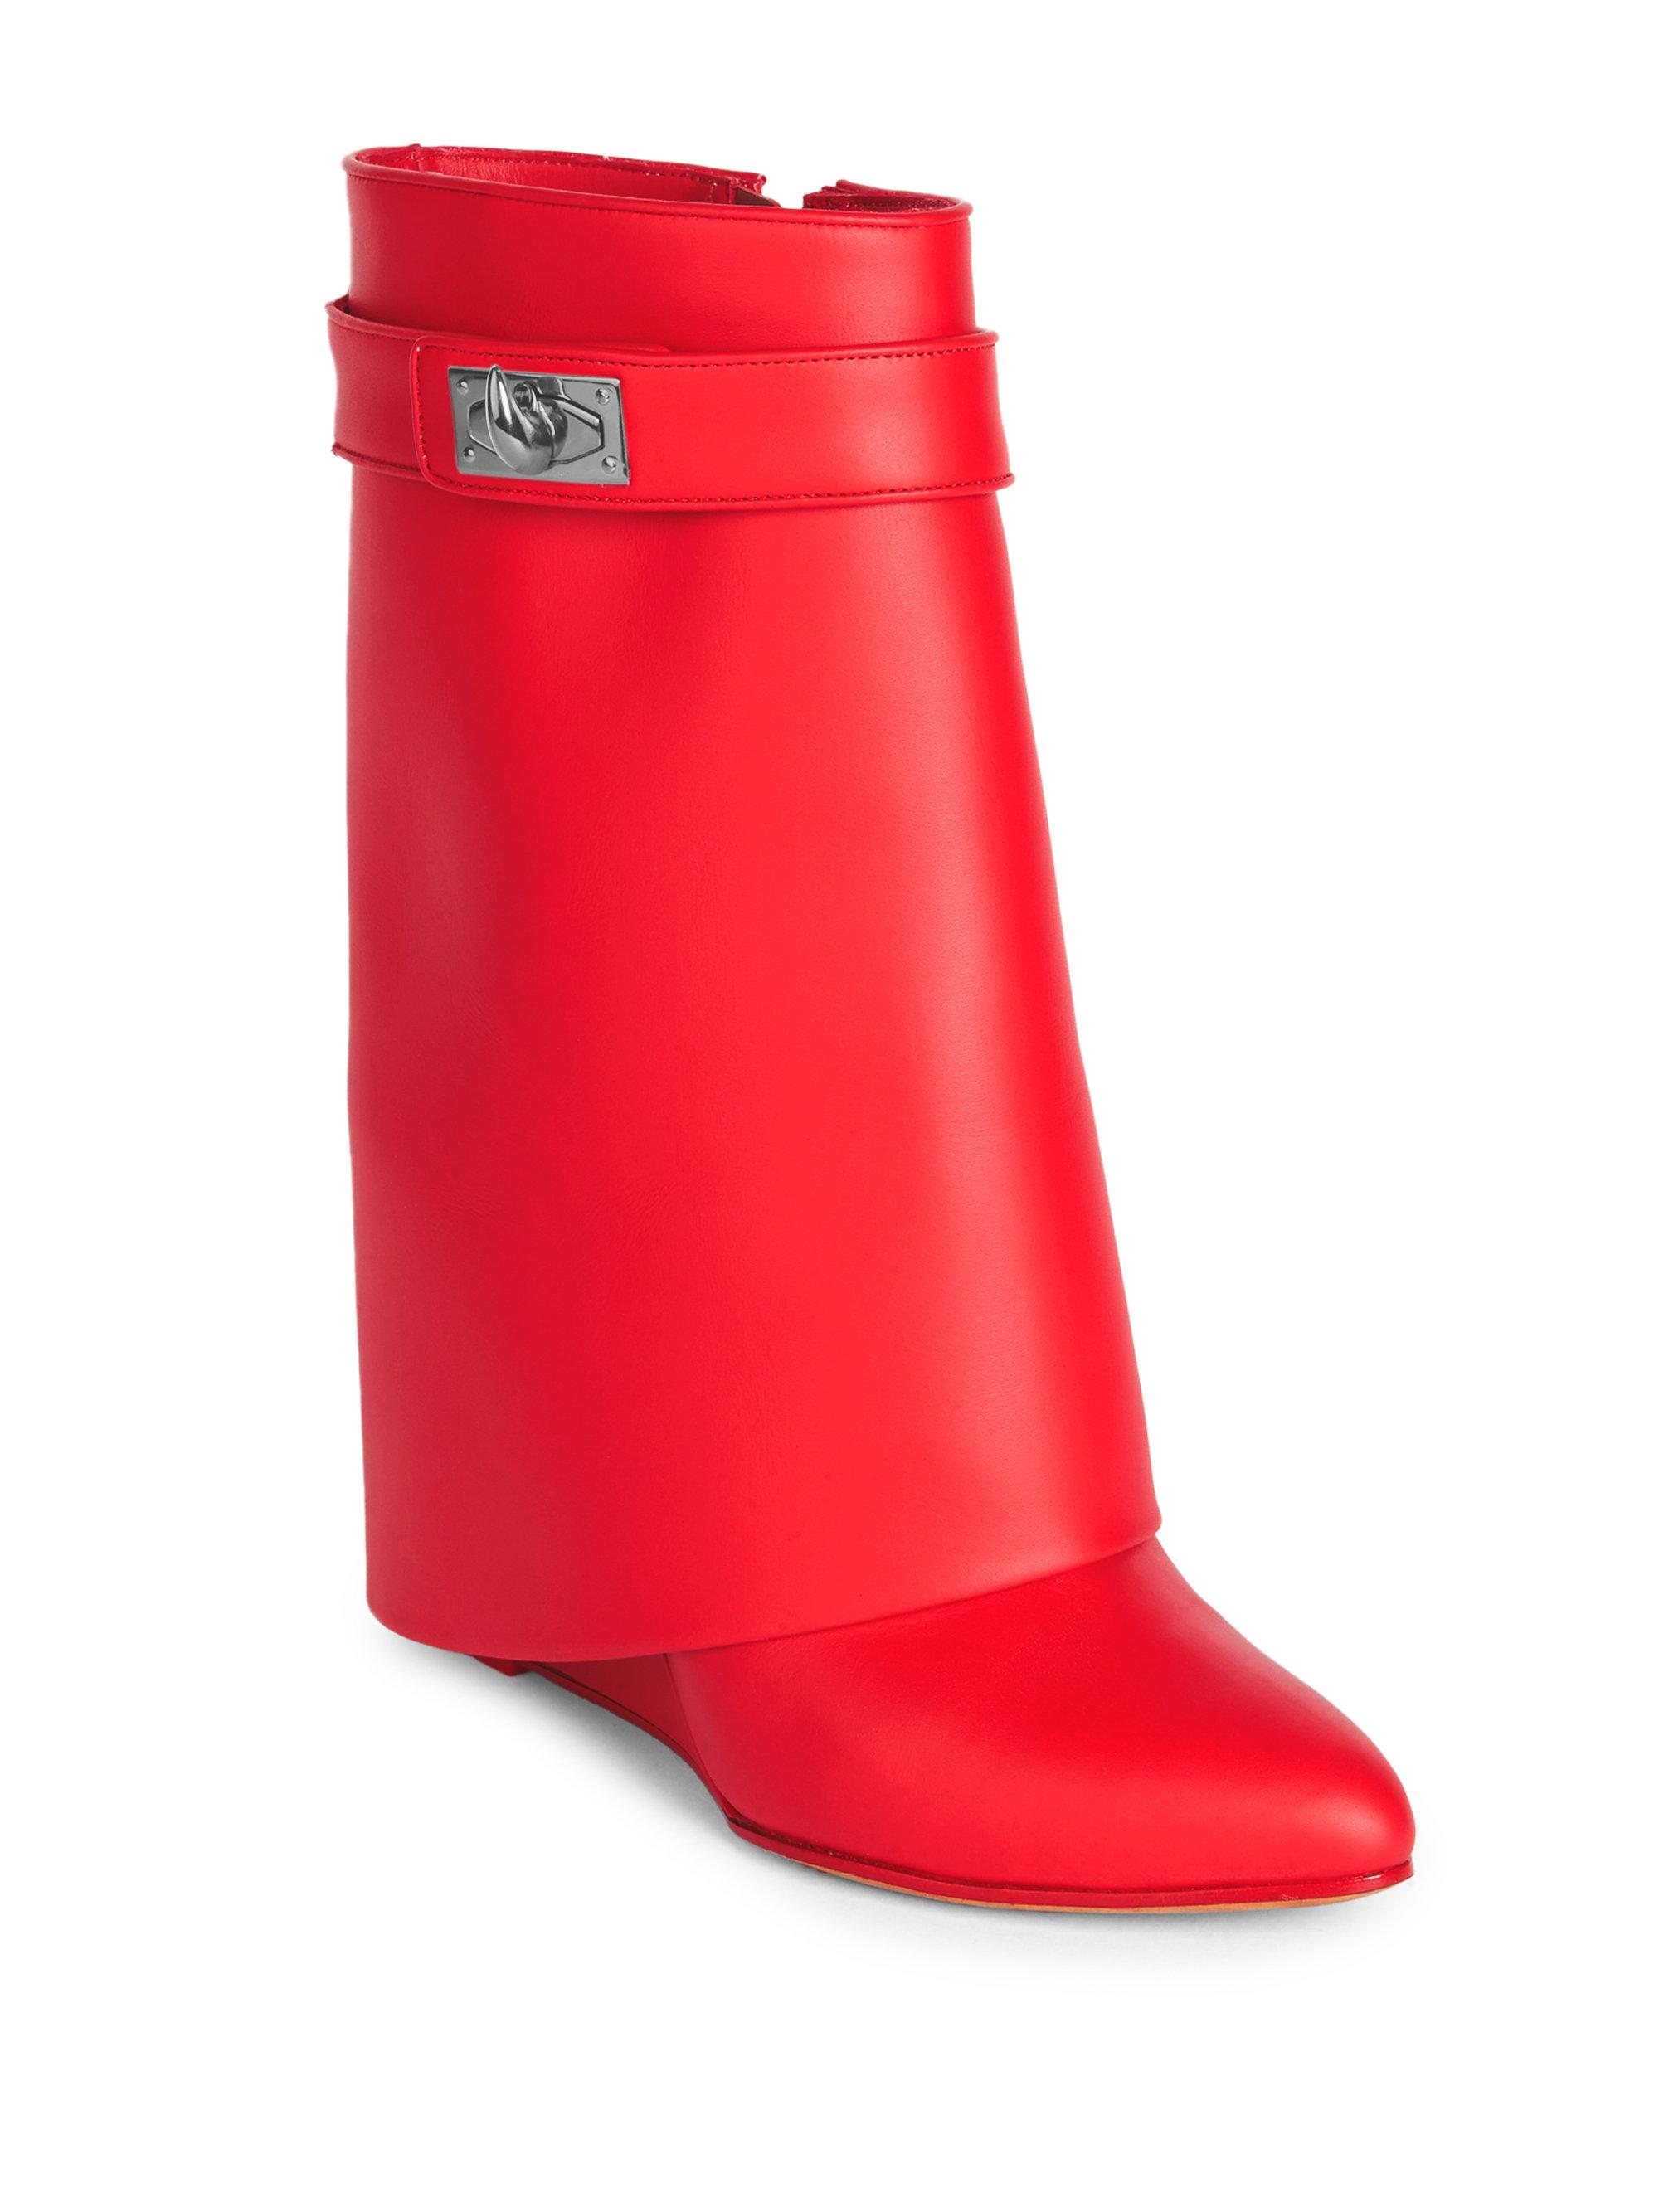 Givenchy Lock Leather Pants Mid-calf Wedge Boots in Red | Lyst